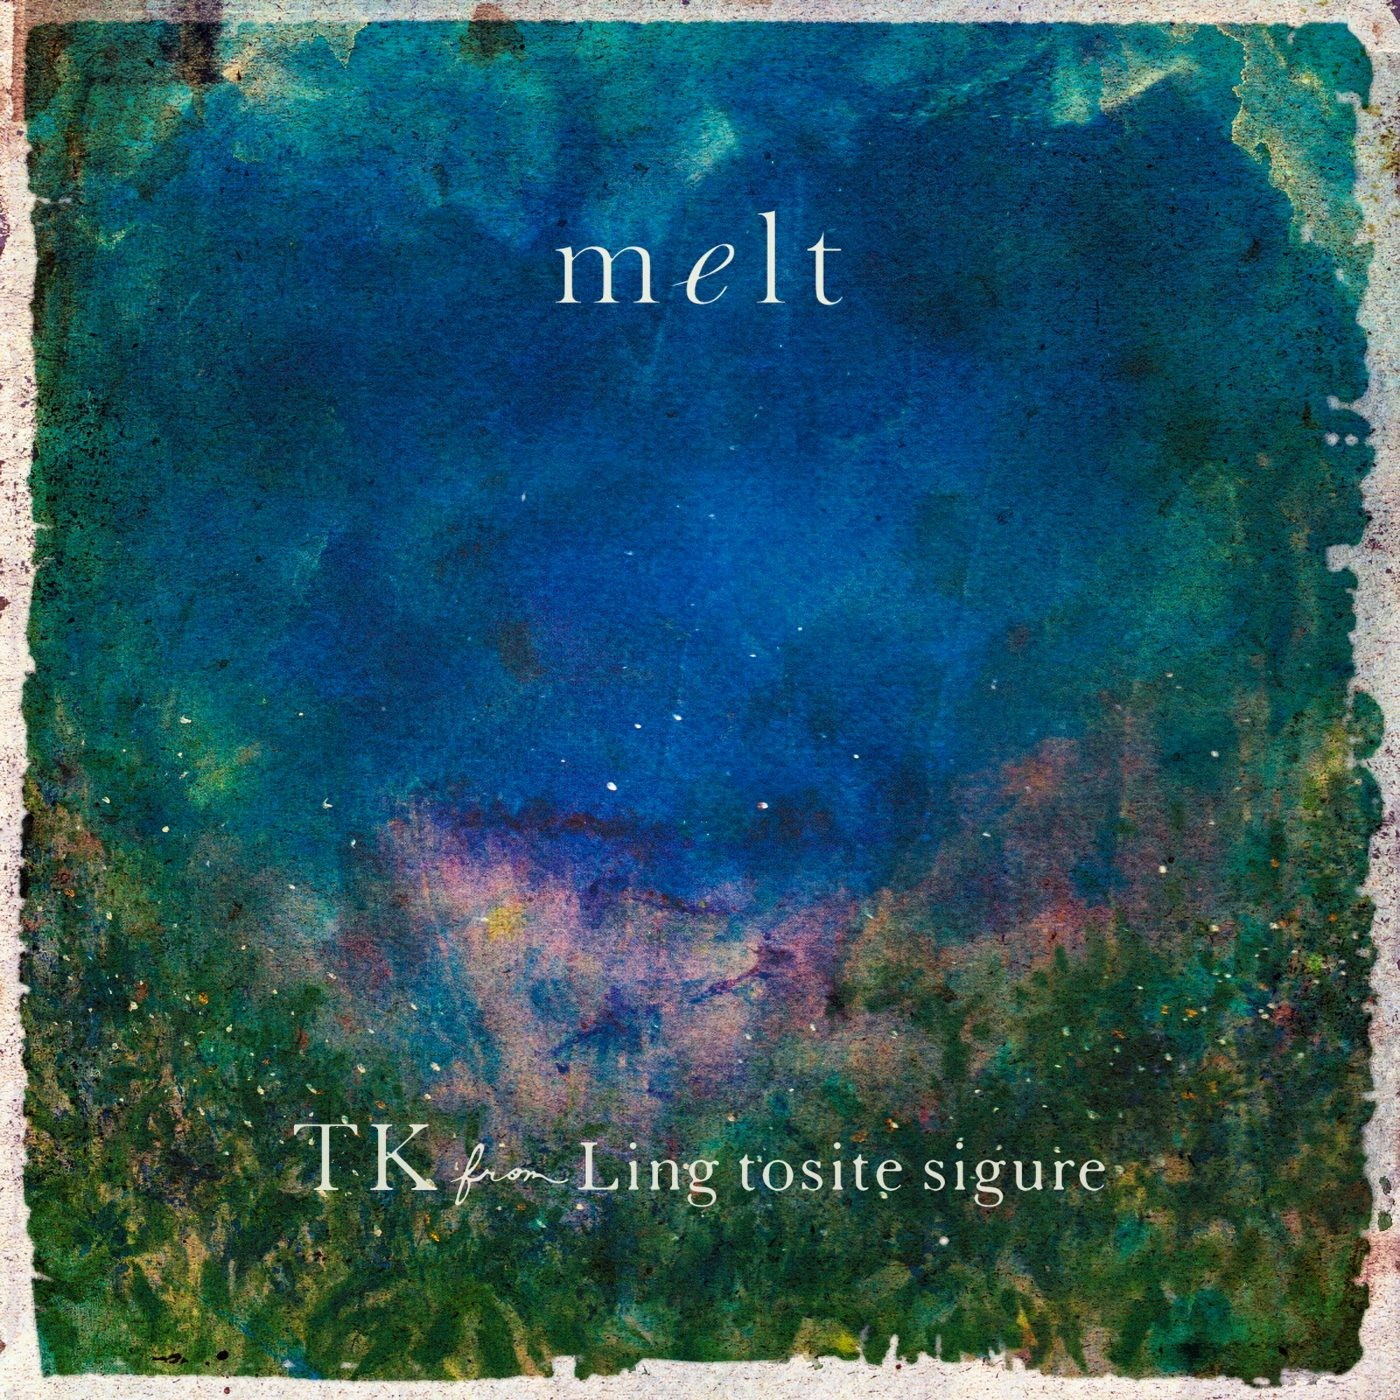 TK from 凛として時雨 (TK from Ling tosite sigure) - melt (with suis from ヨルシカ) [FLAC 24bit/48kHz]